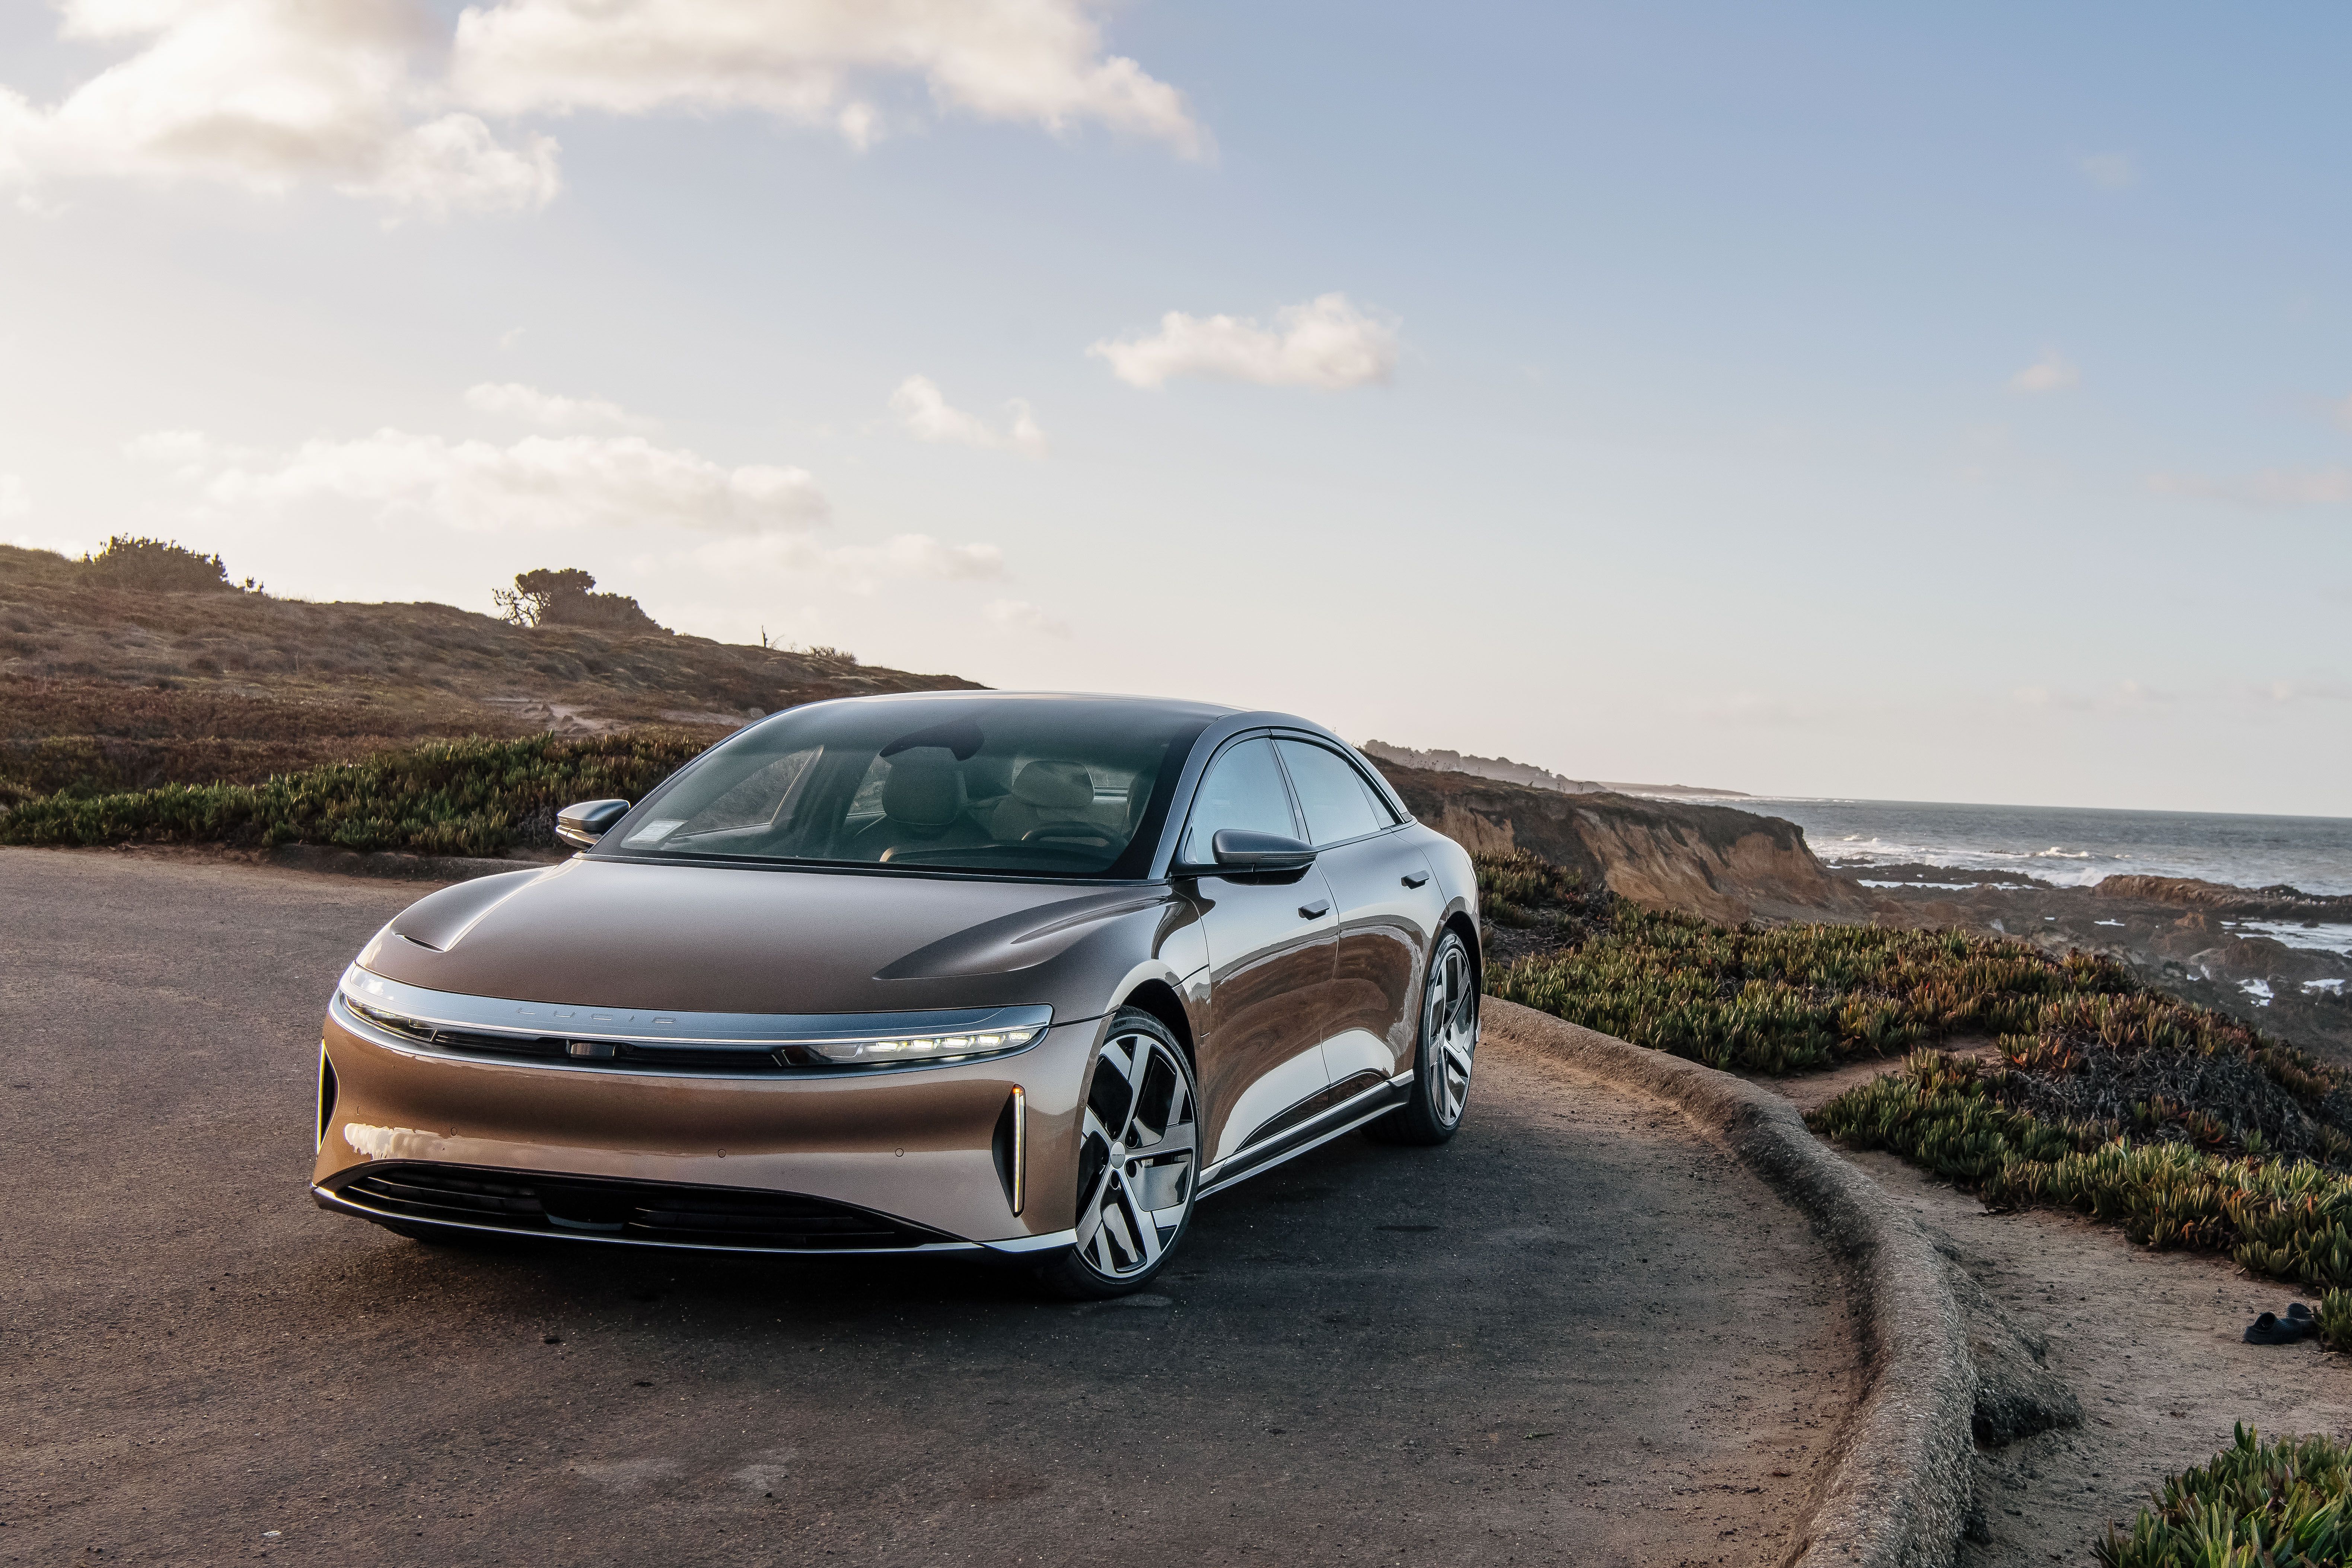 View Photos of the 2022 Lucid Air Dream Edition Performance